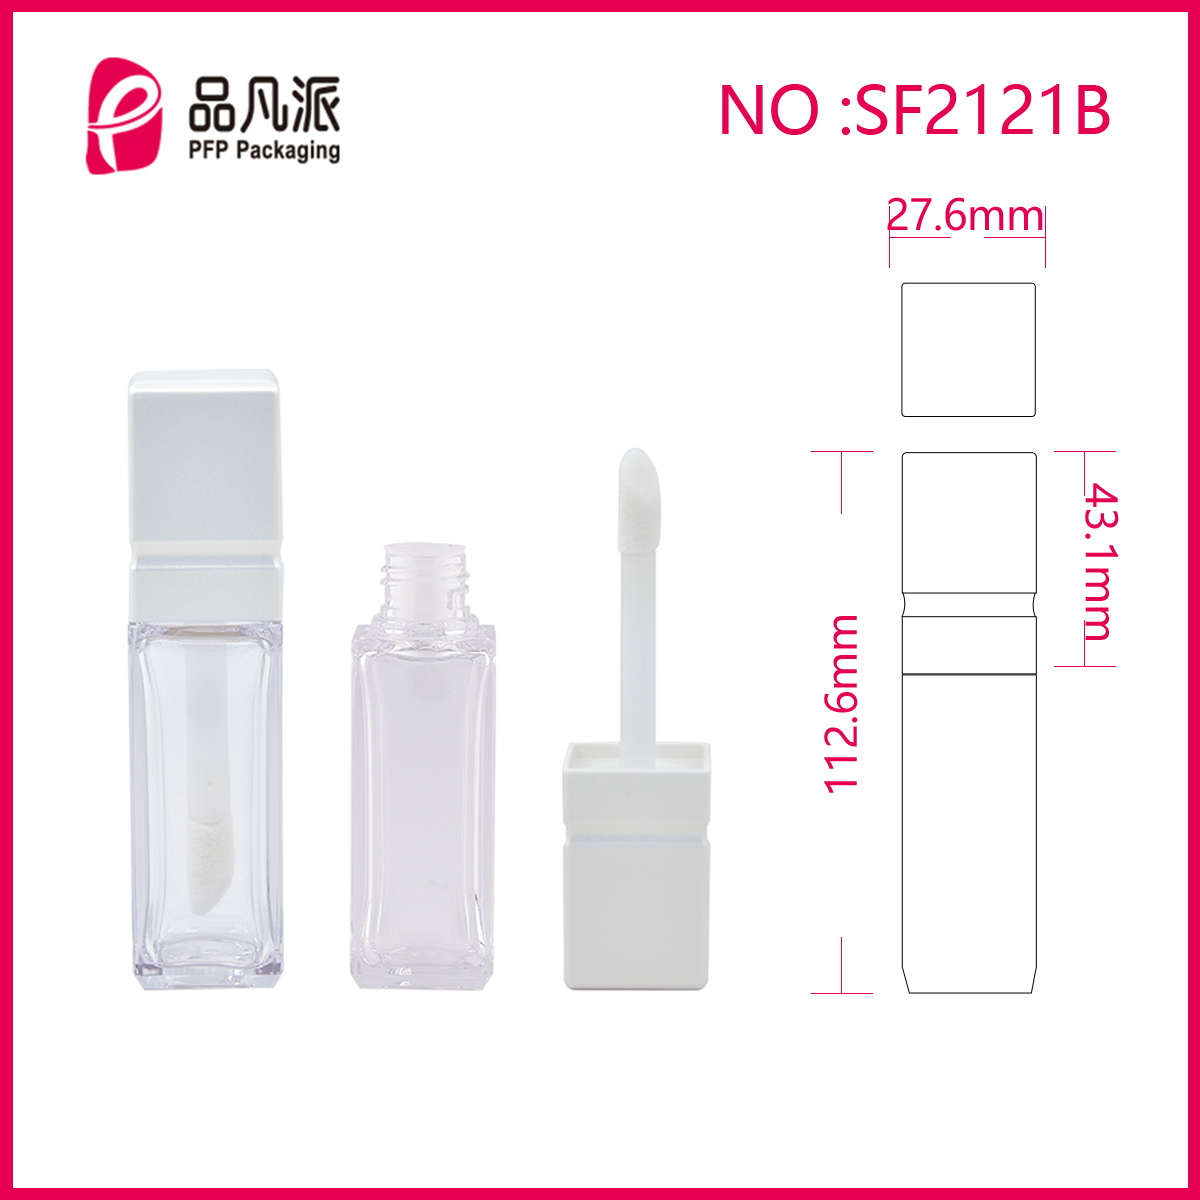 Empty Square Concealer Stick Tubes SF2121B